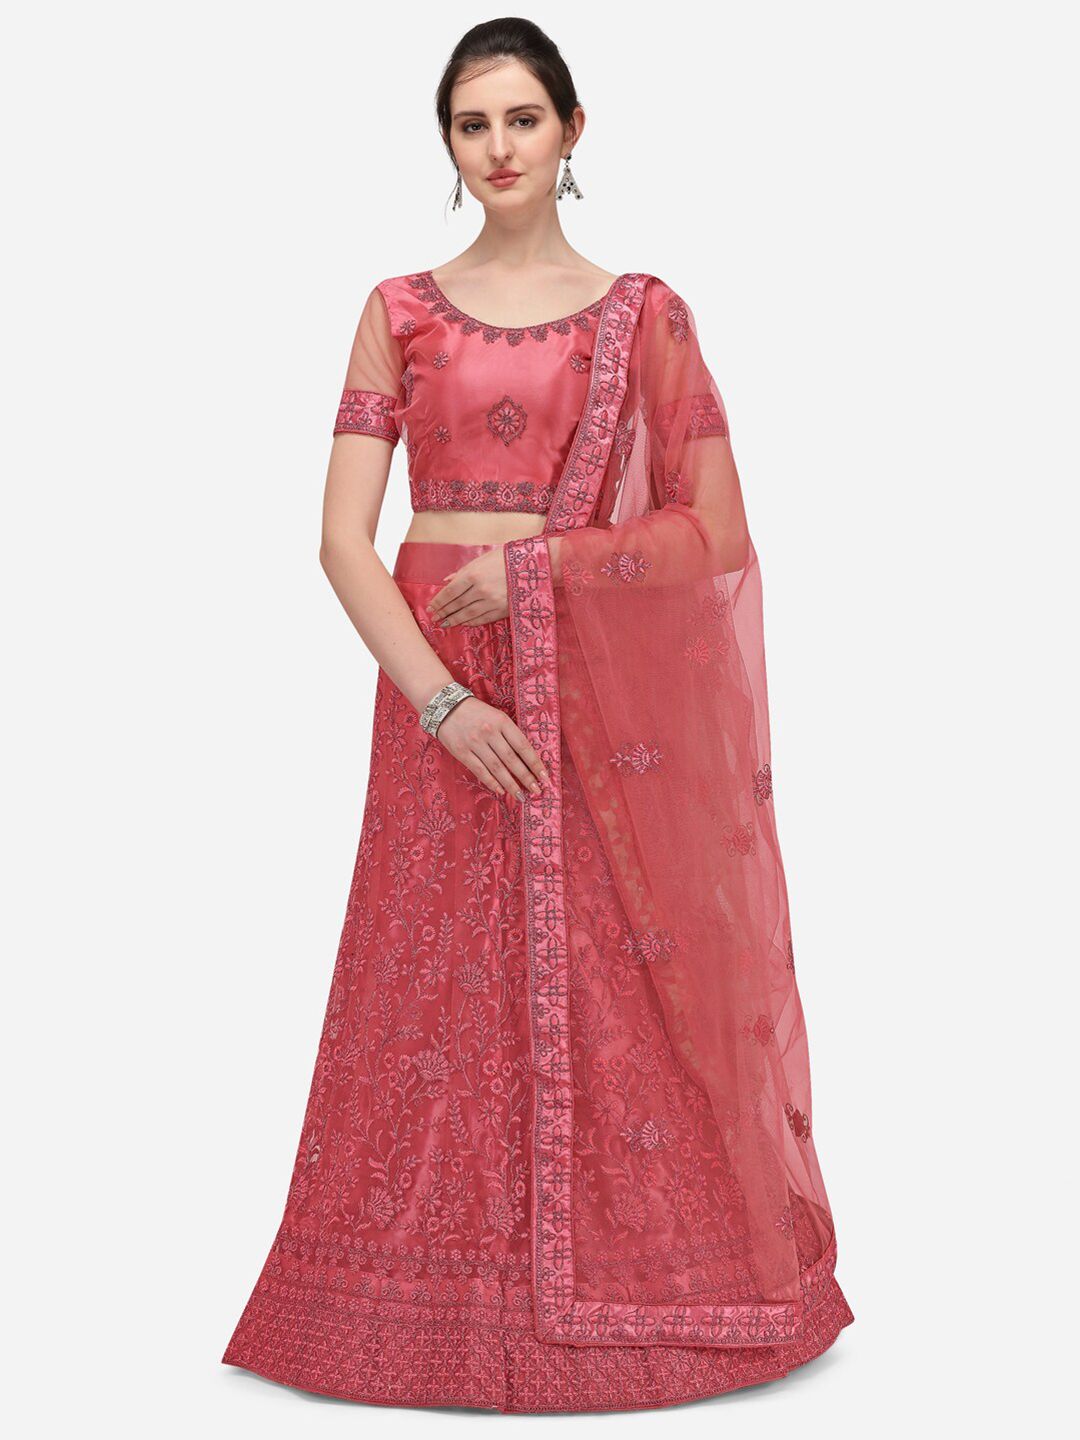 Netram Pink & Silver-Toned Embroidered Semi-Stitched Lehenga & Unstitched Blouse With Dupatta Price in India